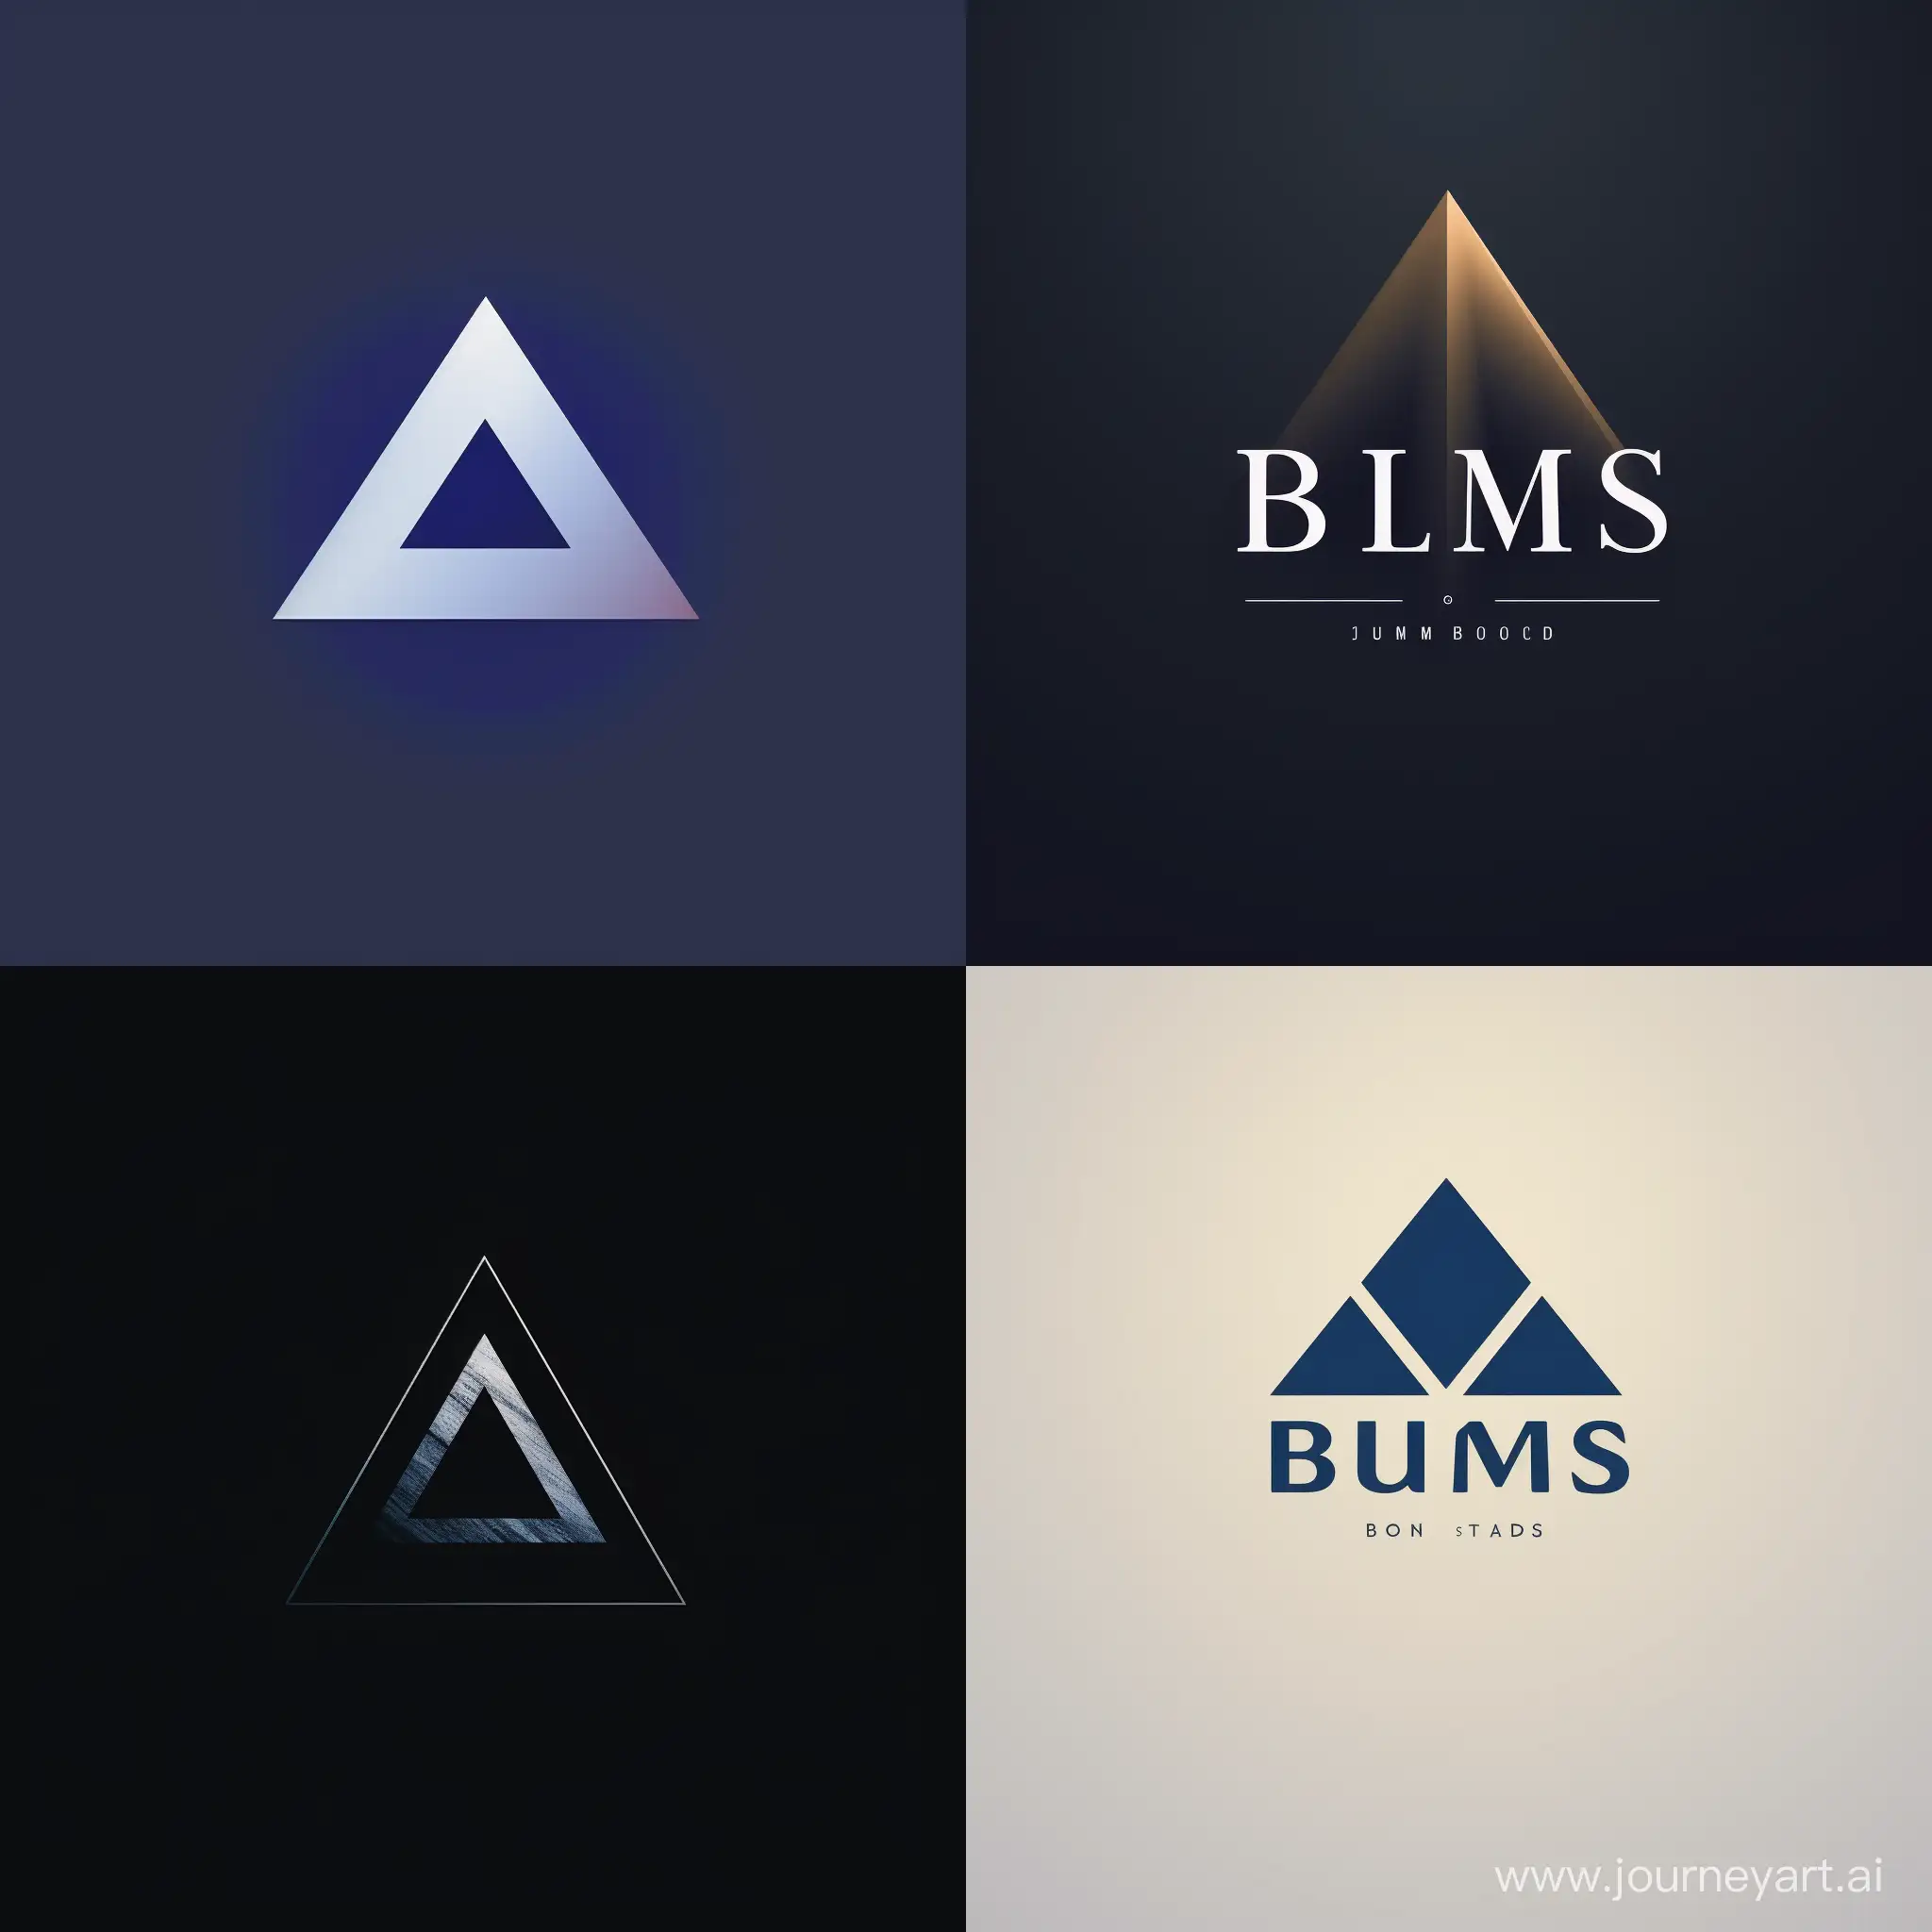 name 'blums' turned into a logo with pyramid and triangle astethetics, simple, minalmalistic, b form, shapes